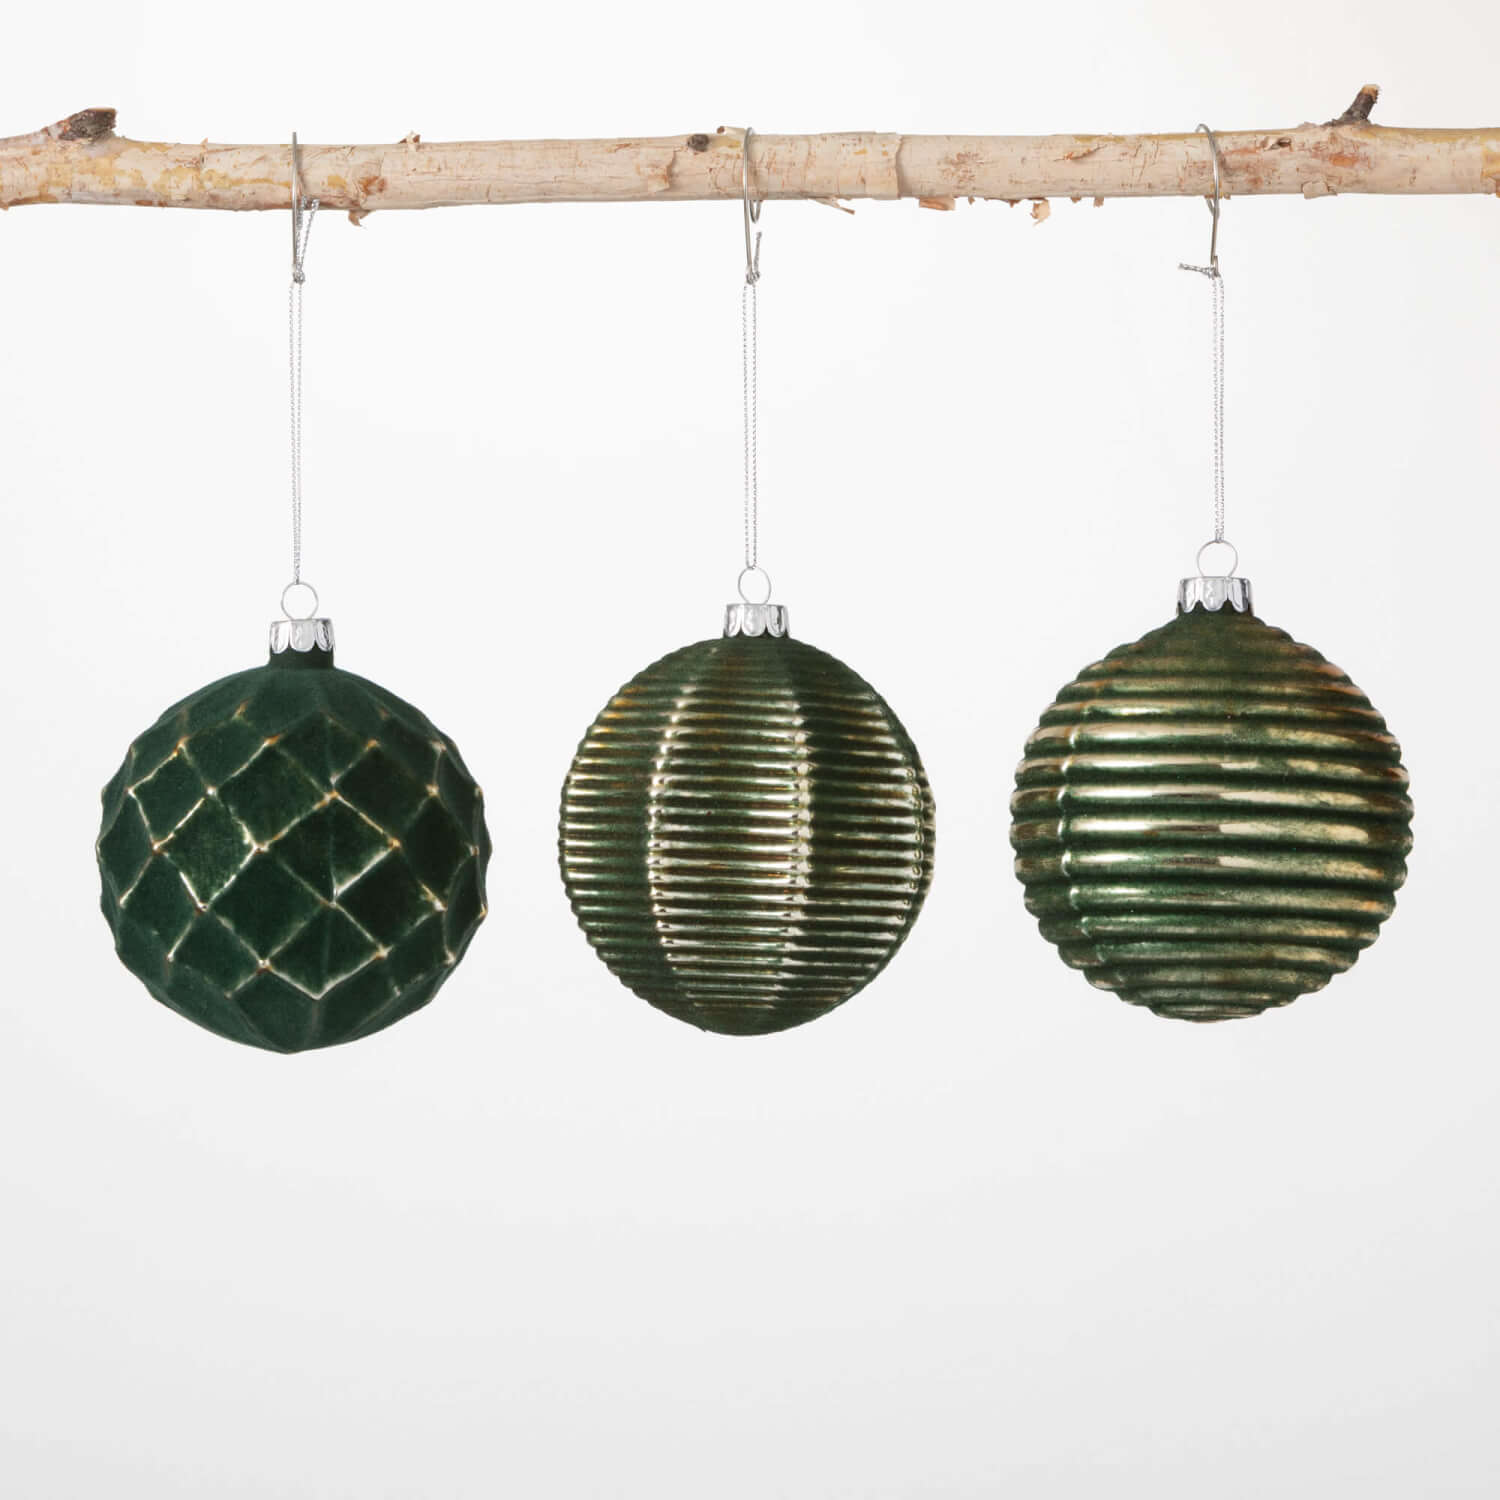 GOLD GREEN TEXTURED ORNAMENTS